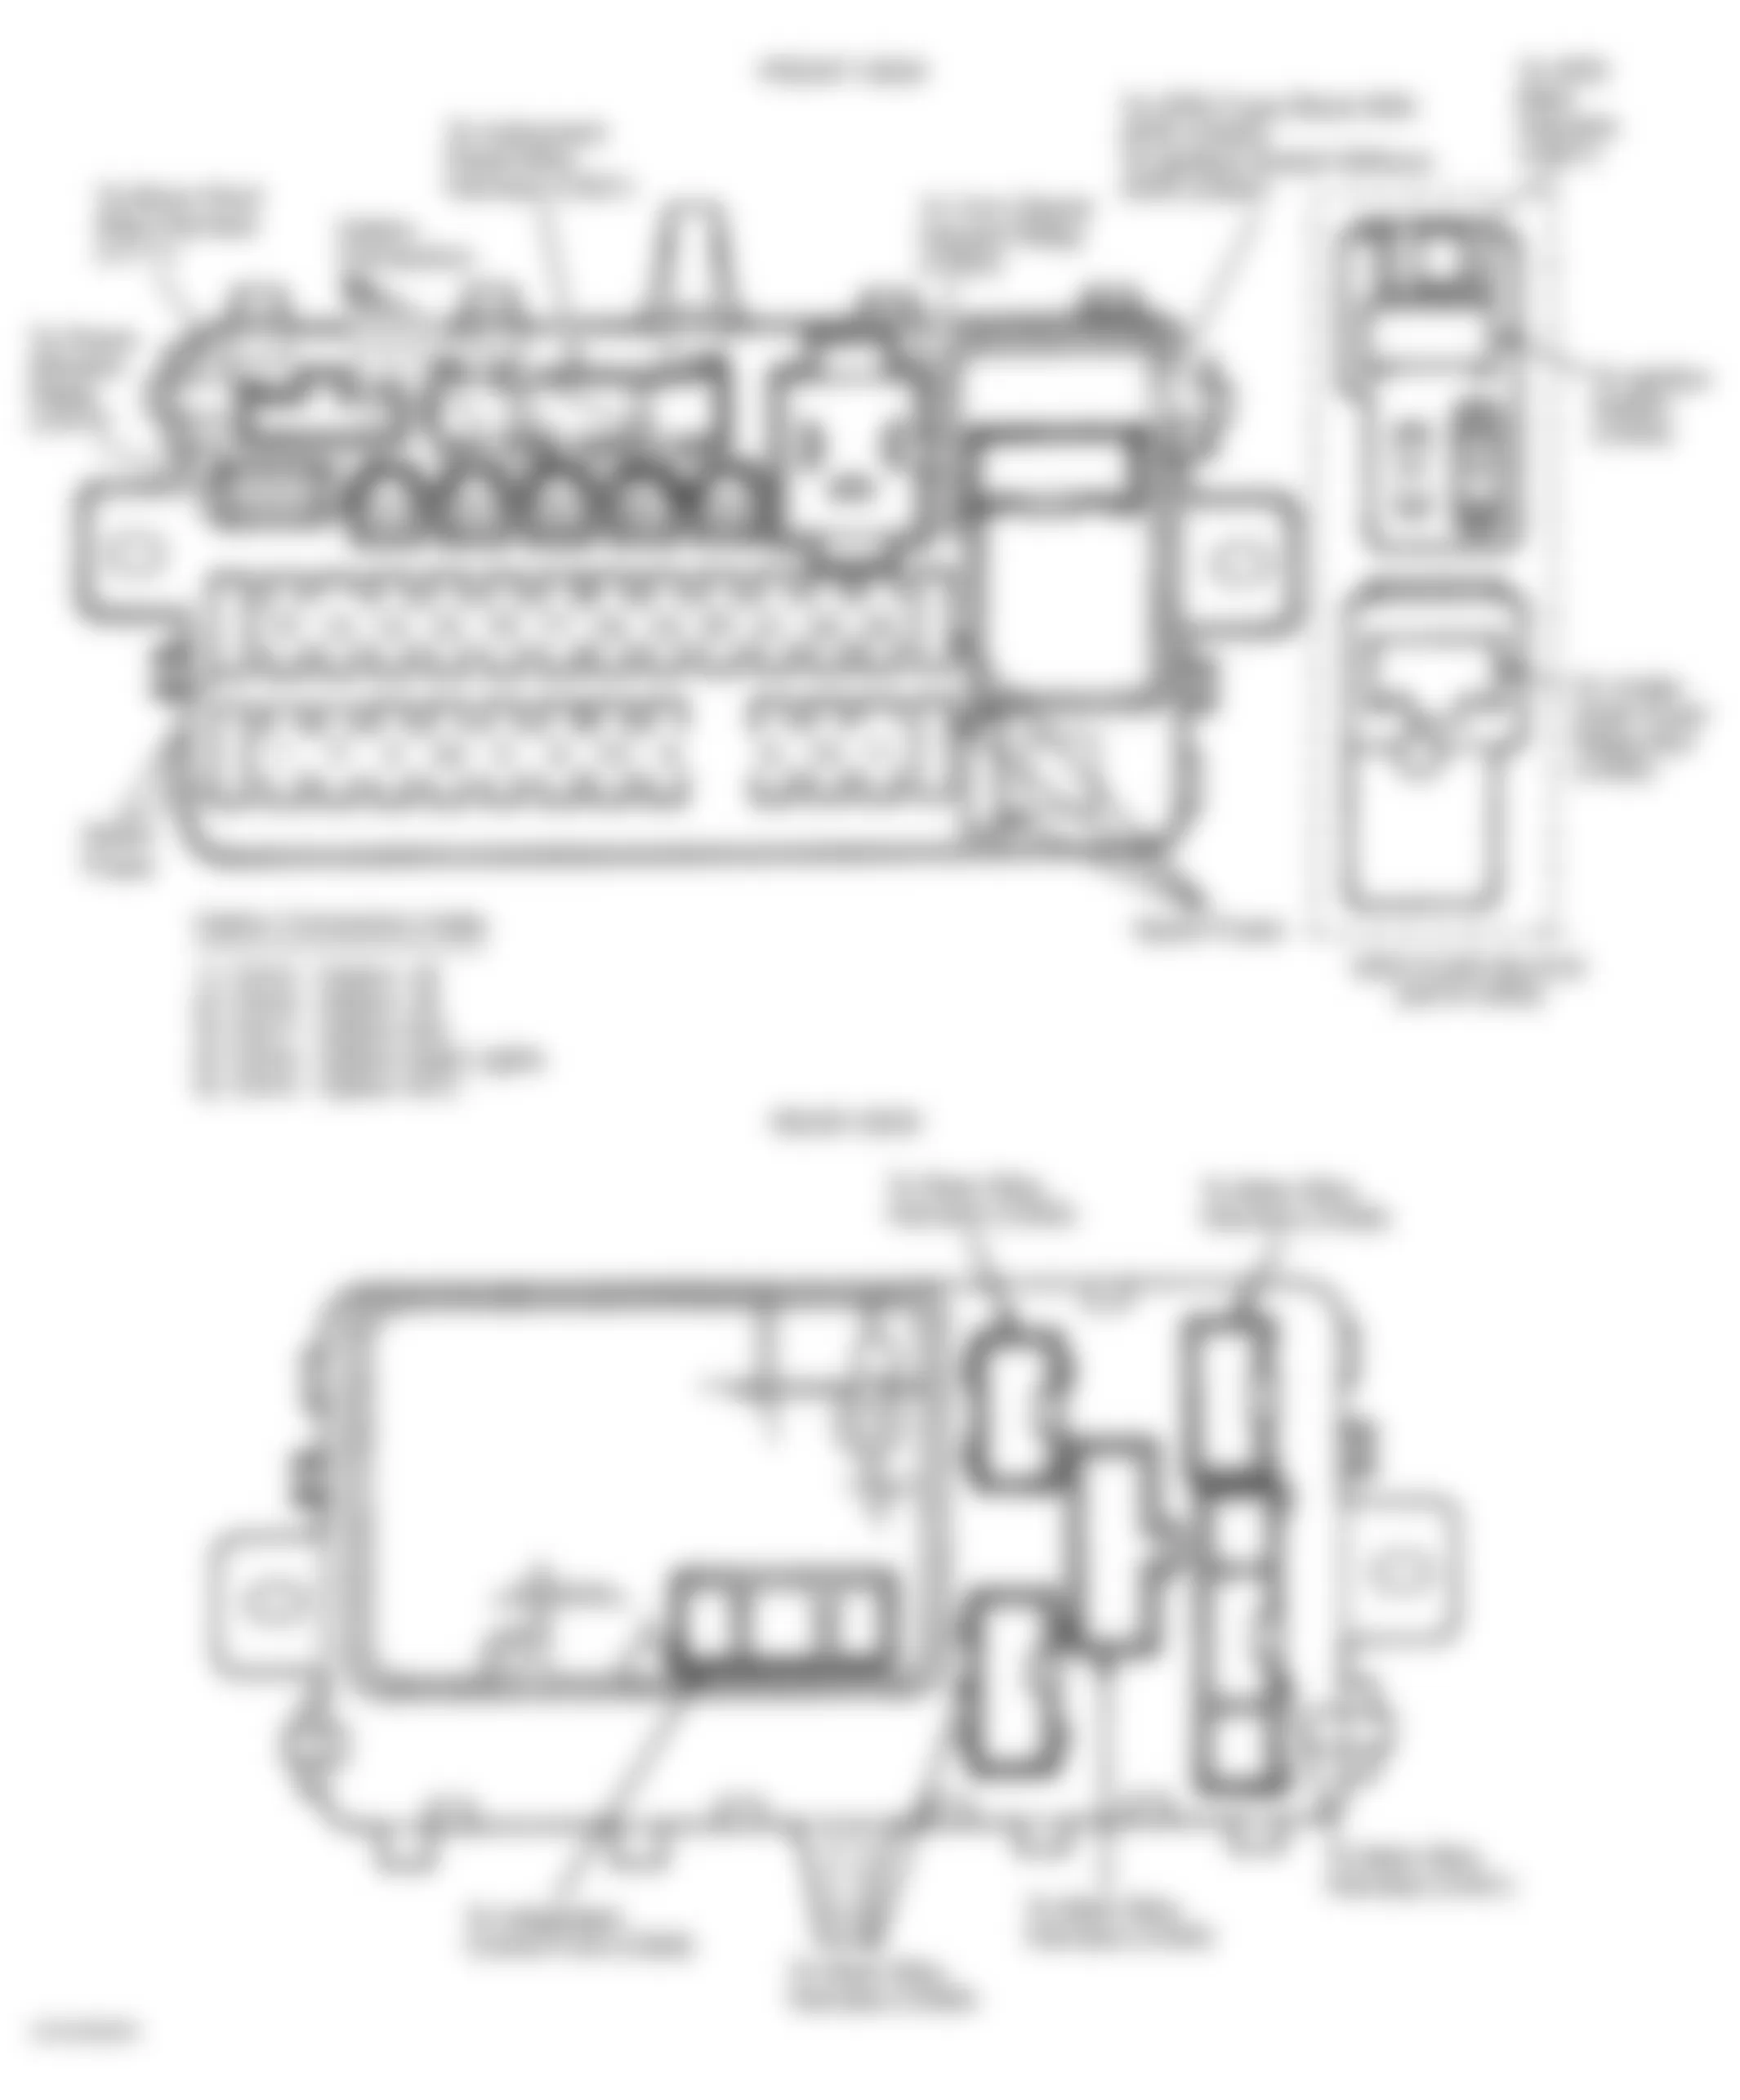 Honda Civic EX 1992 - Component Locations -  Identifying Under-Dash Fuse/Relay Box Components (1994-95 Civic)